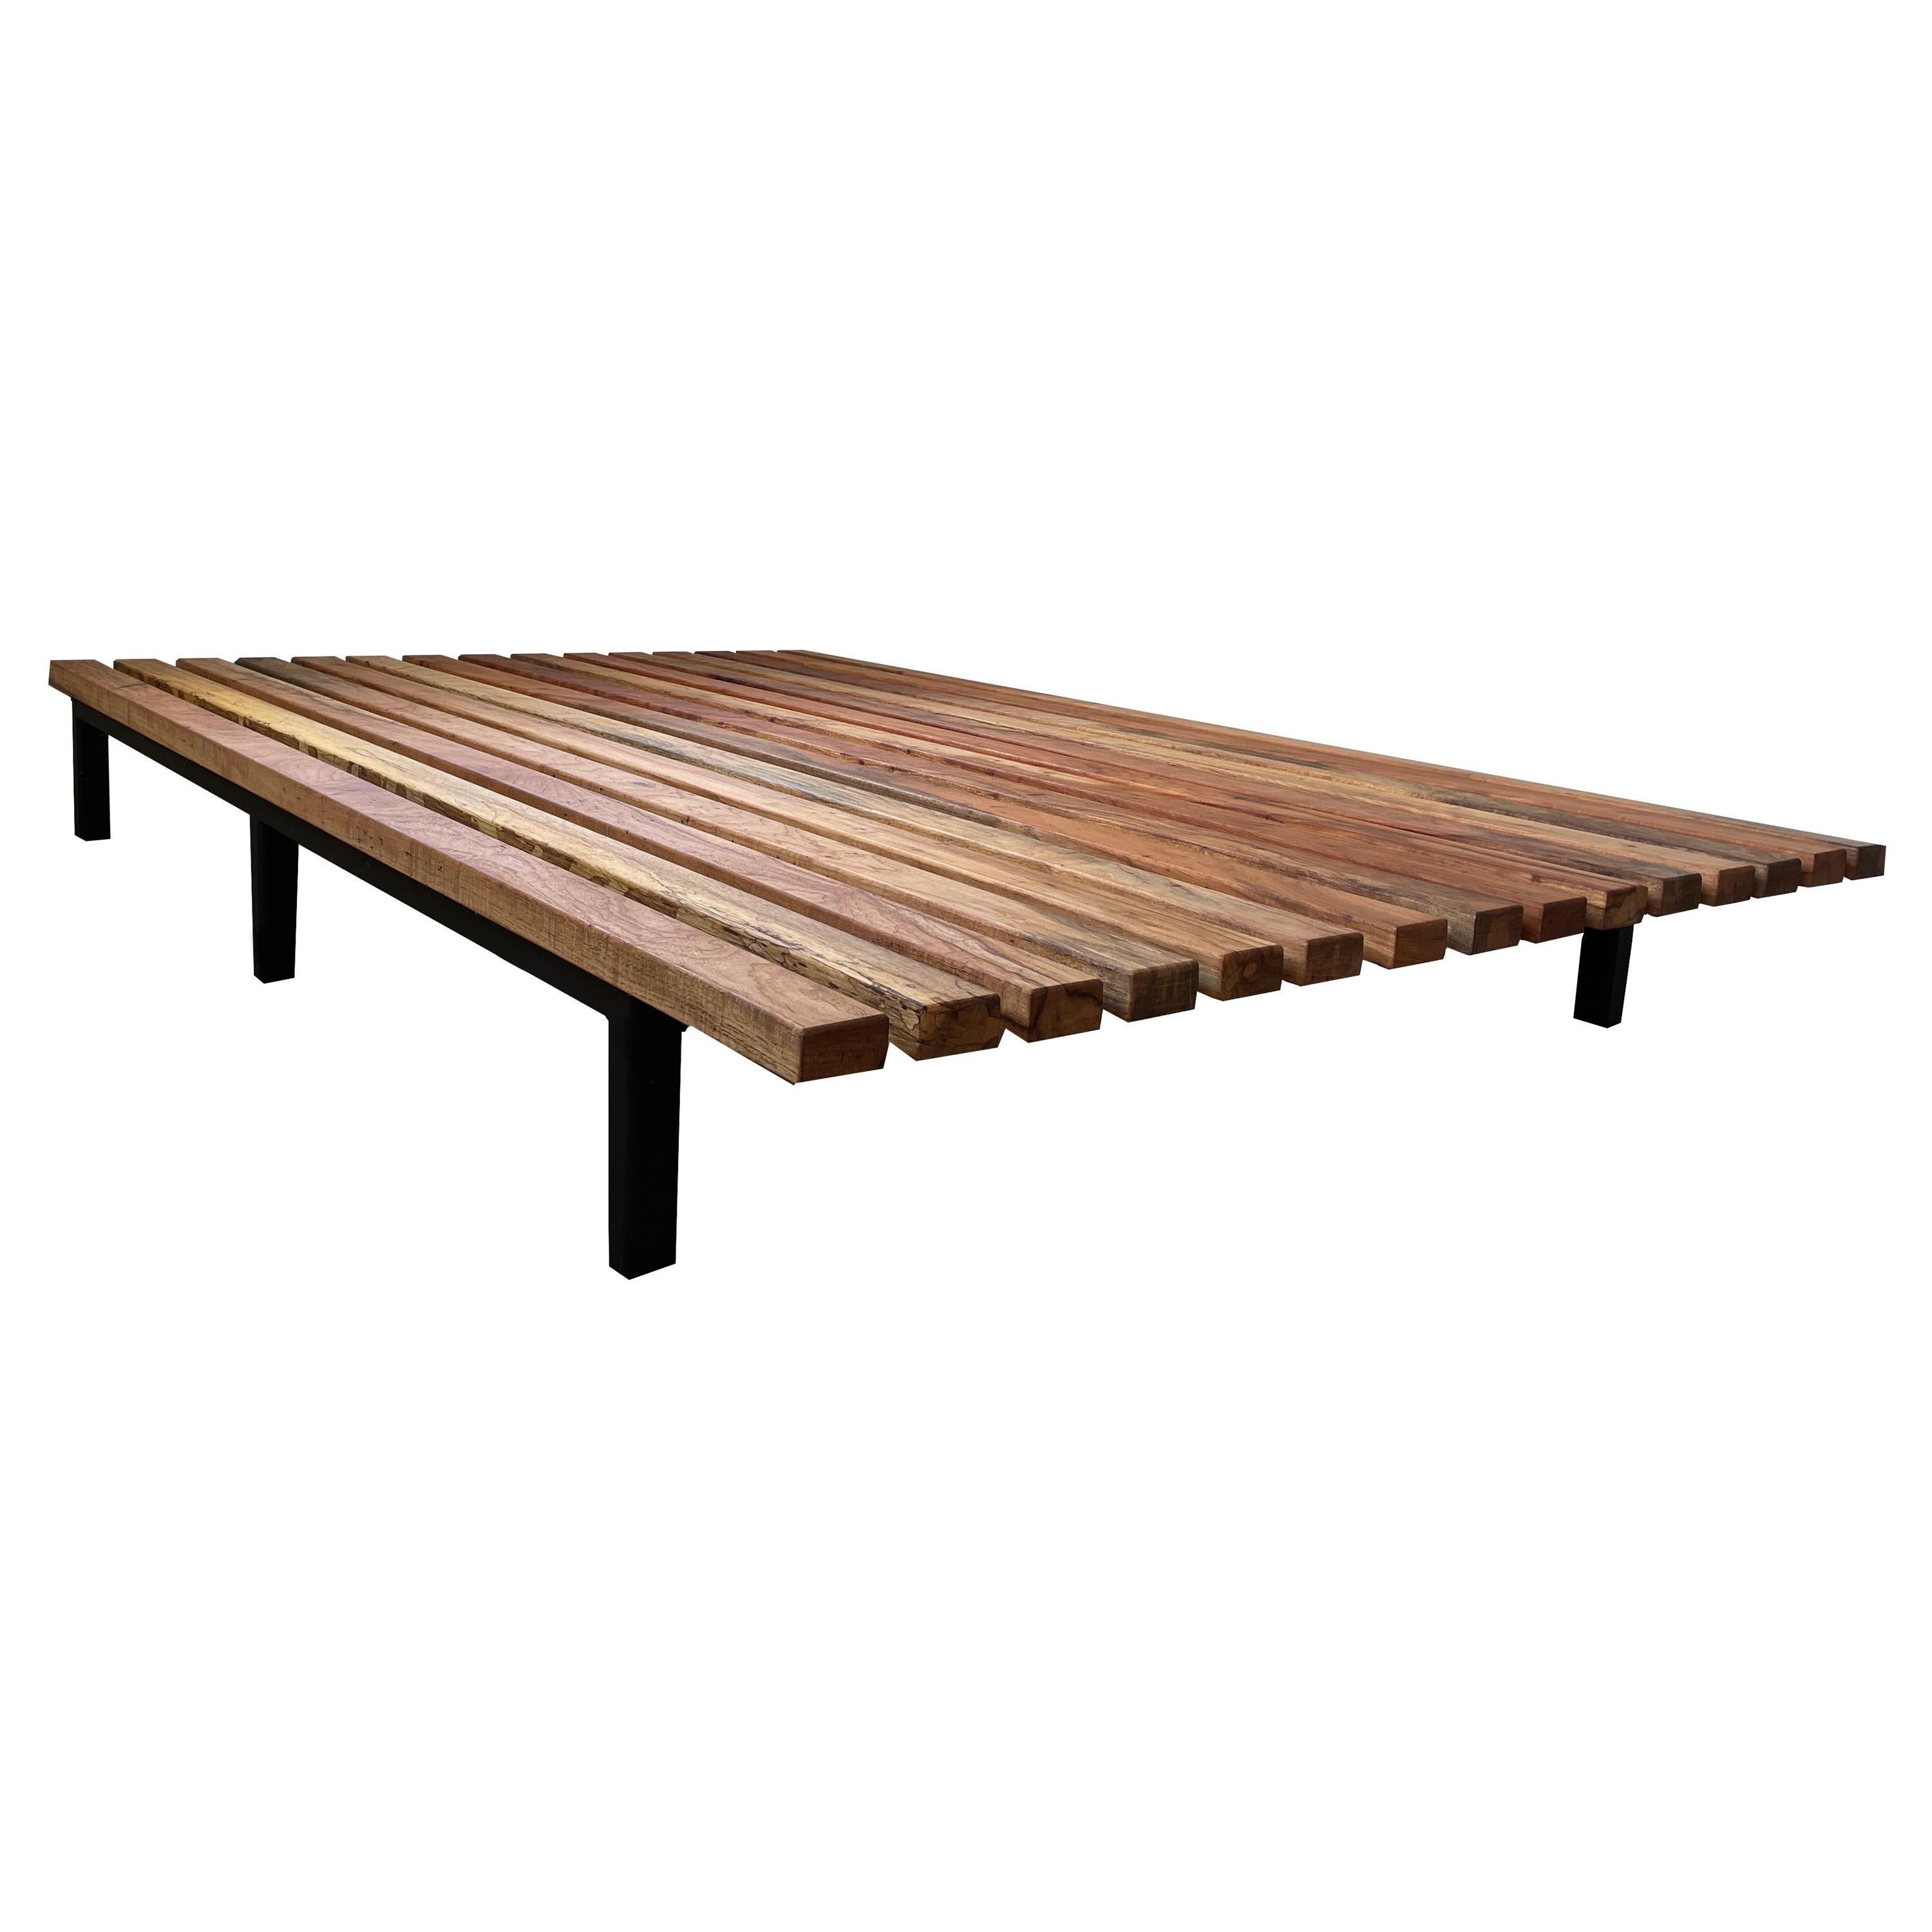 Humphreys King Size Slat Bed, American Pecan Wood with Carbon Coated Steel Base For Sale